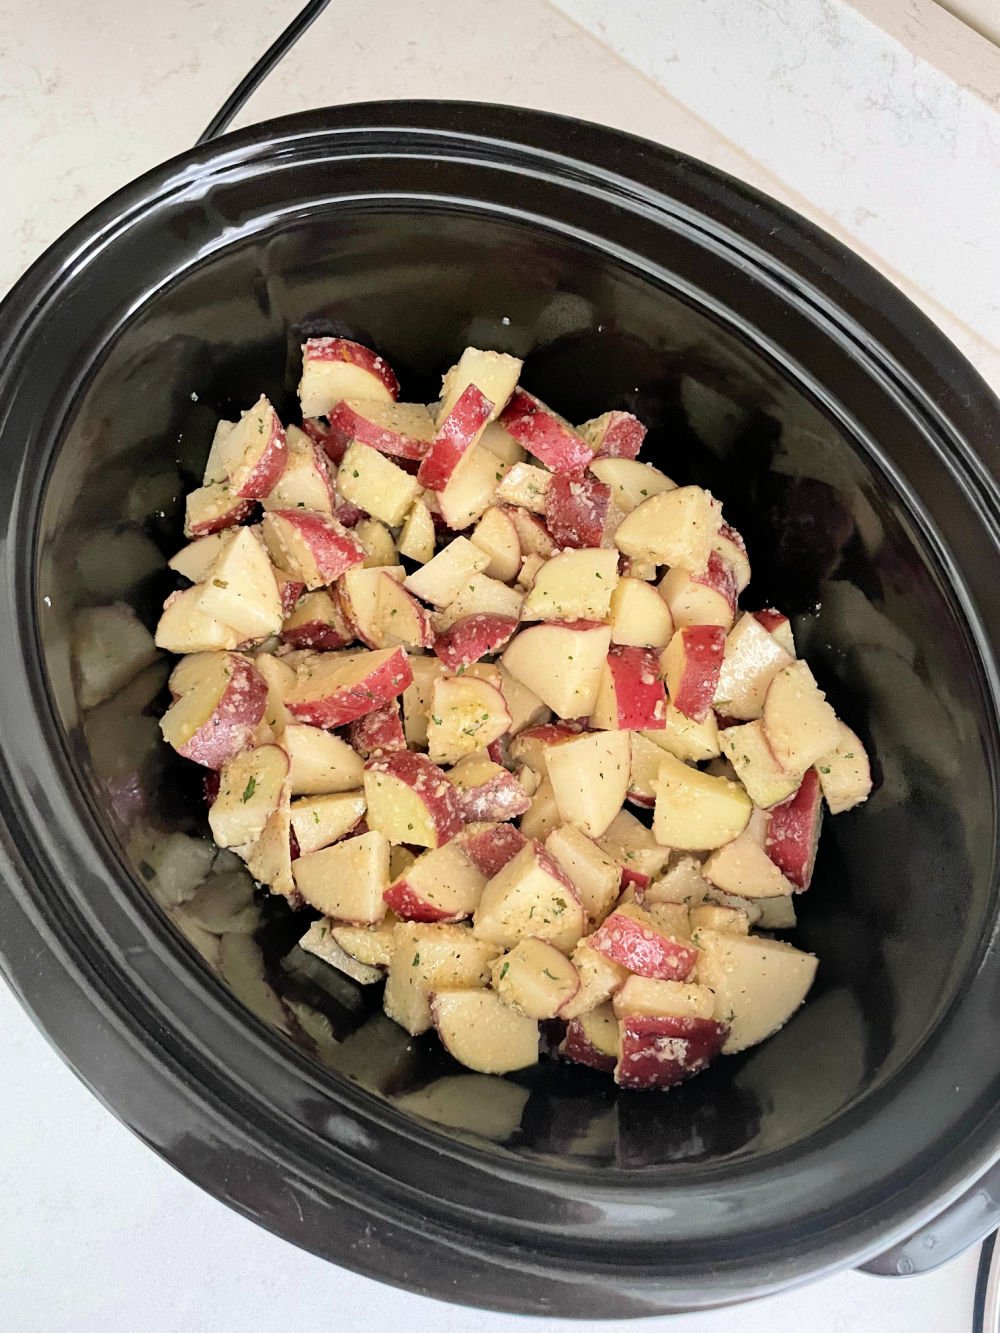 Cut and seasoned potatoes in slow cooker